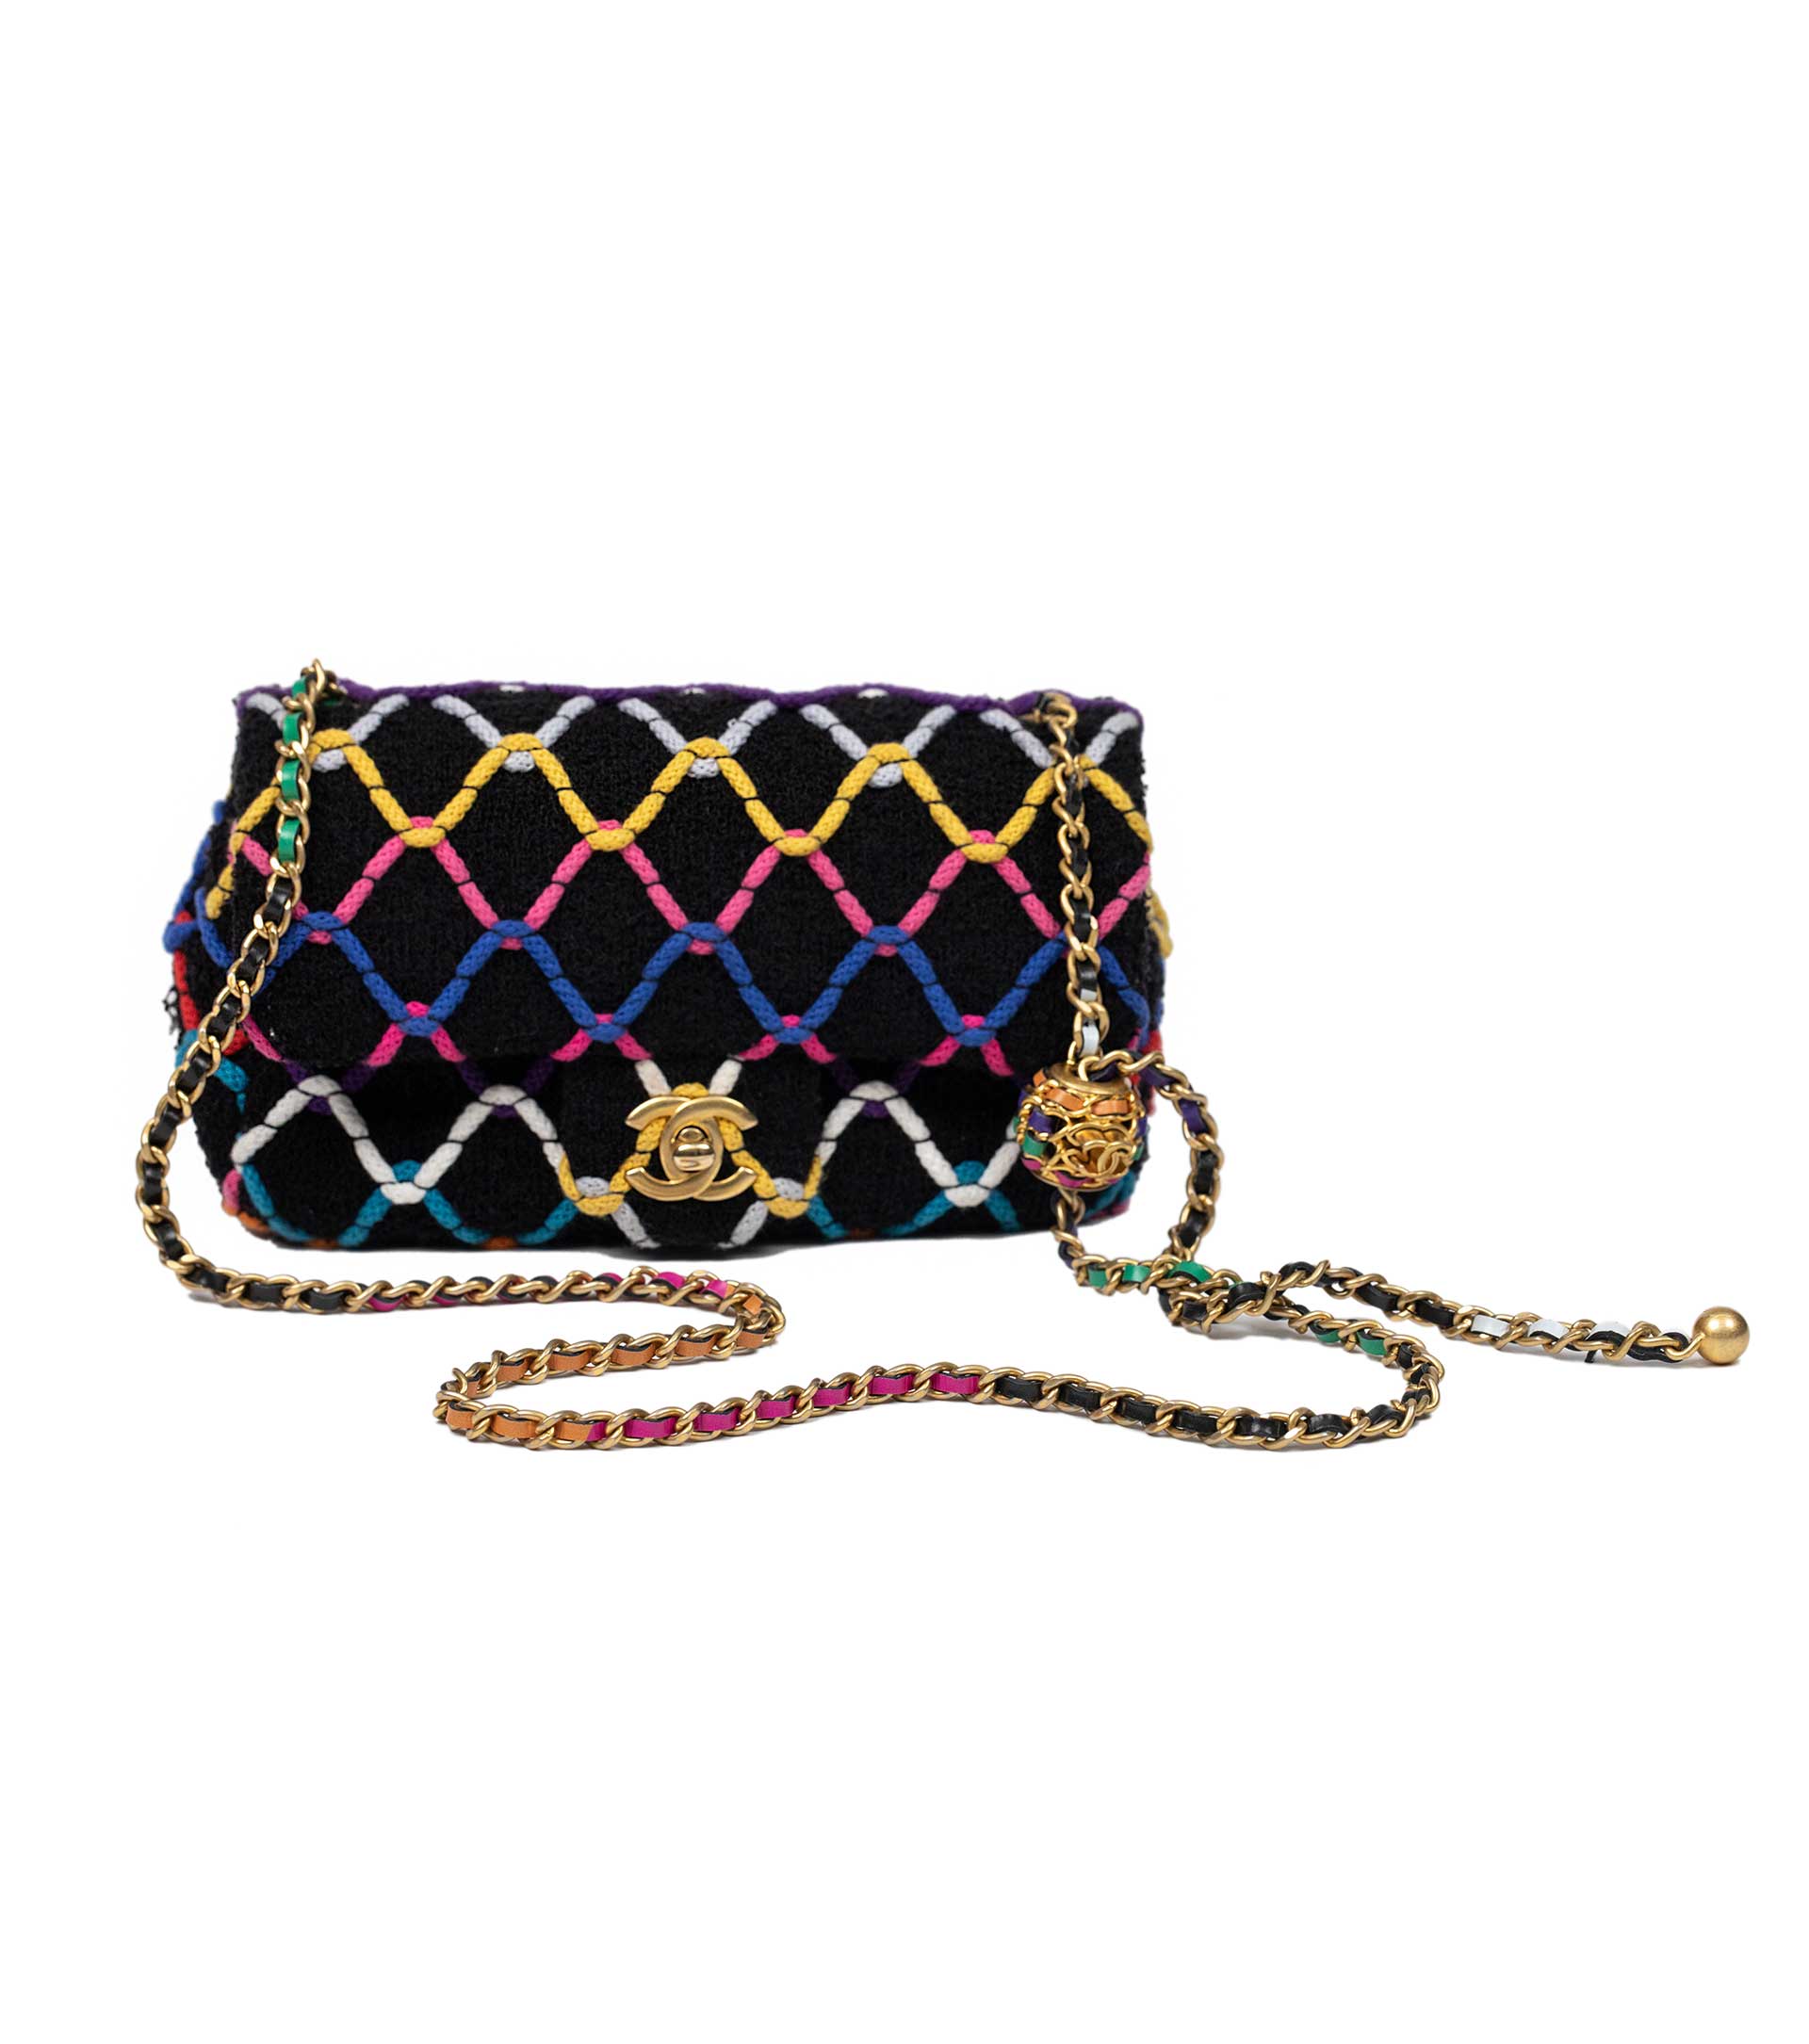 Sold at Auction: Chanel Black and Multicolor Tweed Pearl Crush